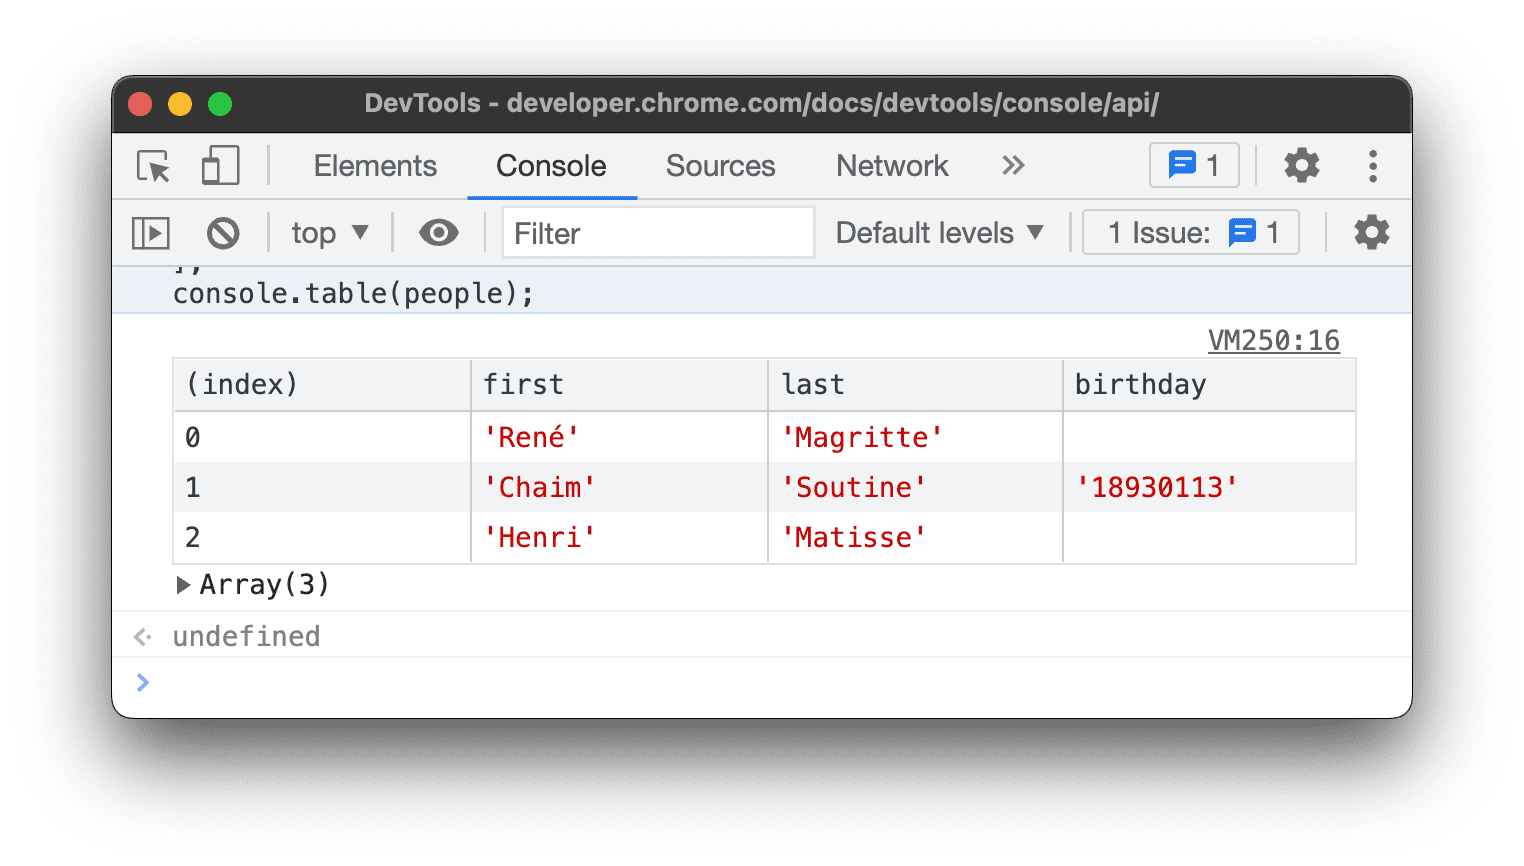 The result of the console.table() example above.